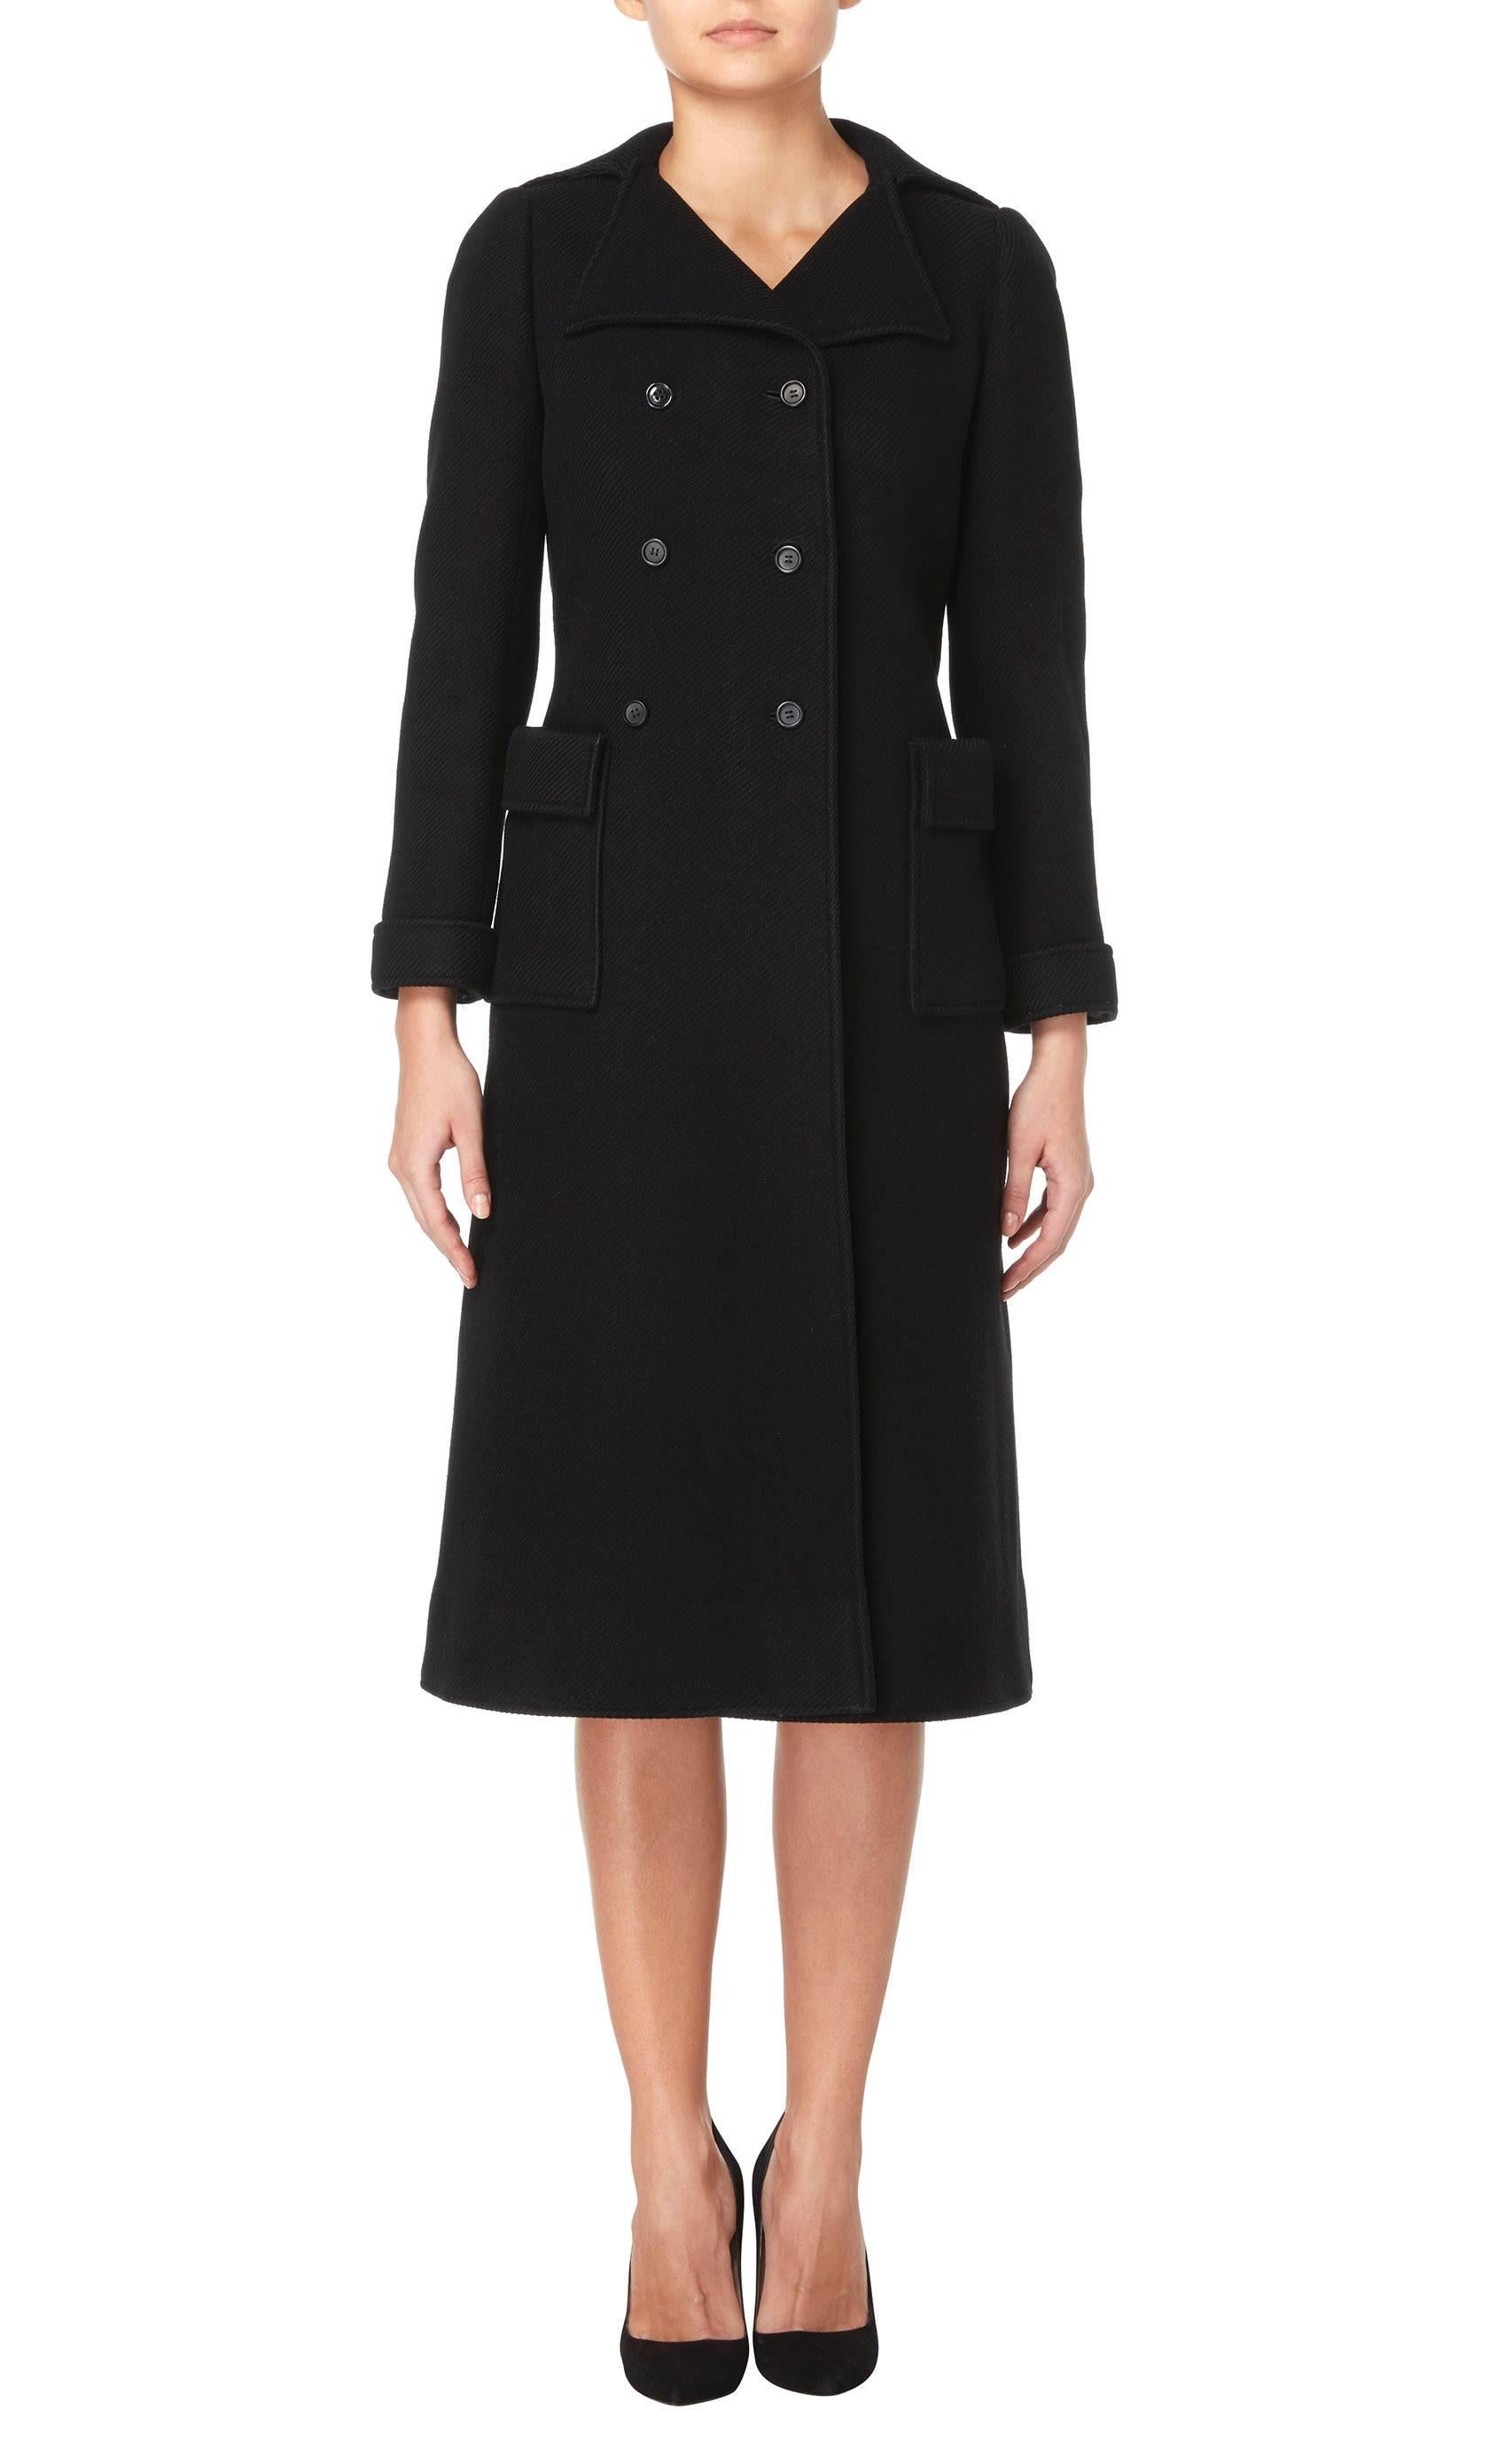 This classic Courrèges coat would make a fantastic addition to any modern wardrobe. Double-breasted and constructed in black wool, this piece will instantly become a wardrobe staple. Featuring a double lapel collar, half belt to the rear and